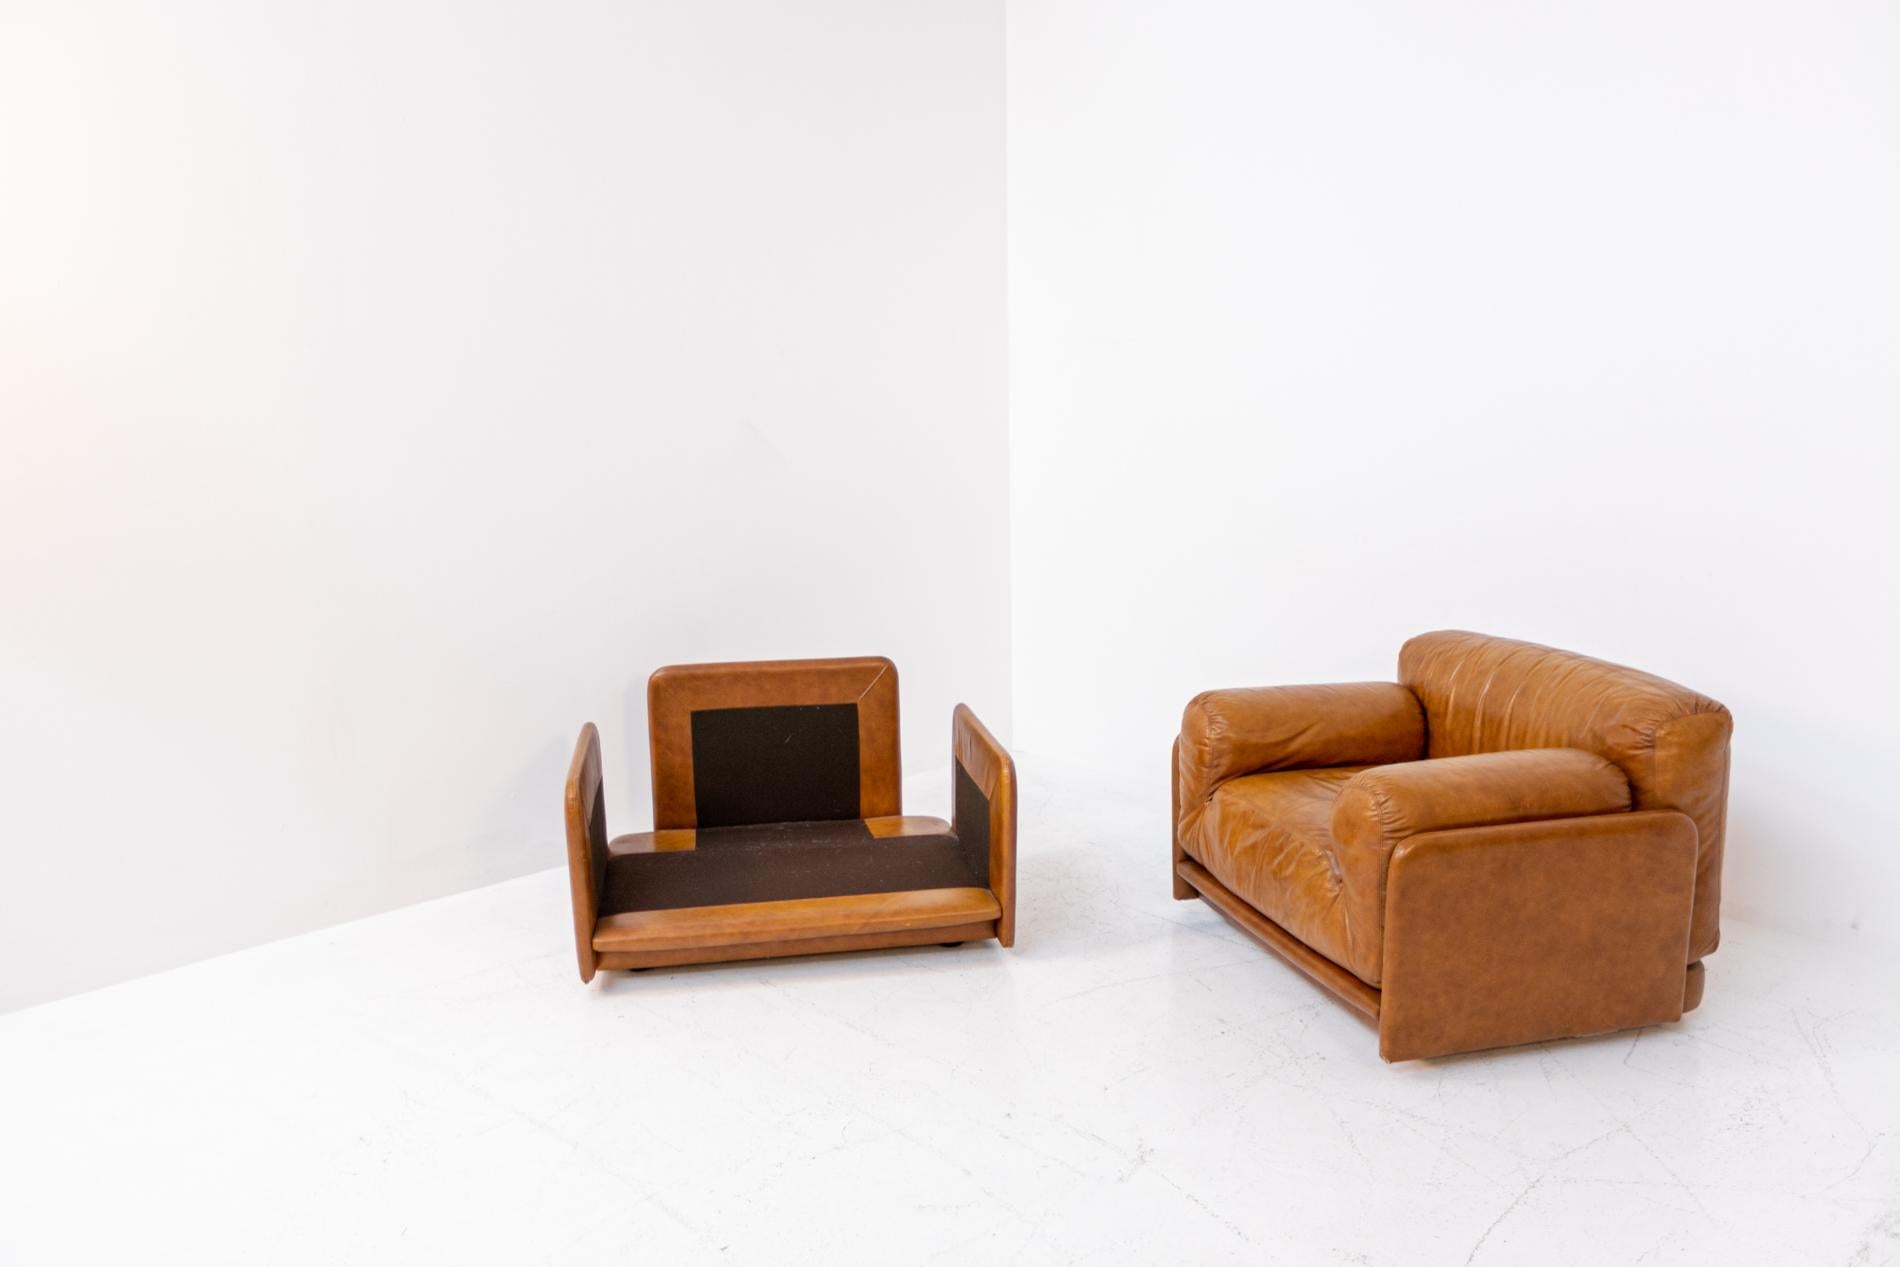 Stunning pair of fine camel colored leather armchairs from the 1970s.
The armchairs are made by Saporiti Italia.
The structure is in sturdy wood and the upholstery in leather. The seat and the armrests are in a single body with a soft and rounded